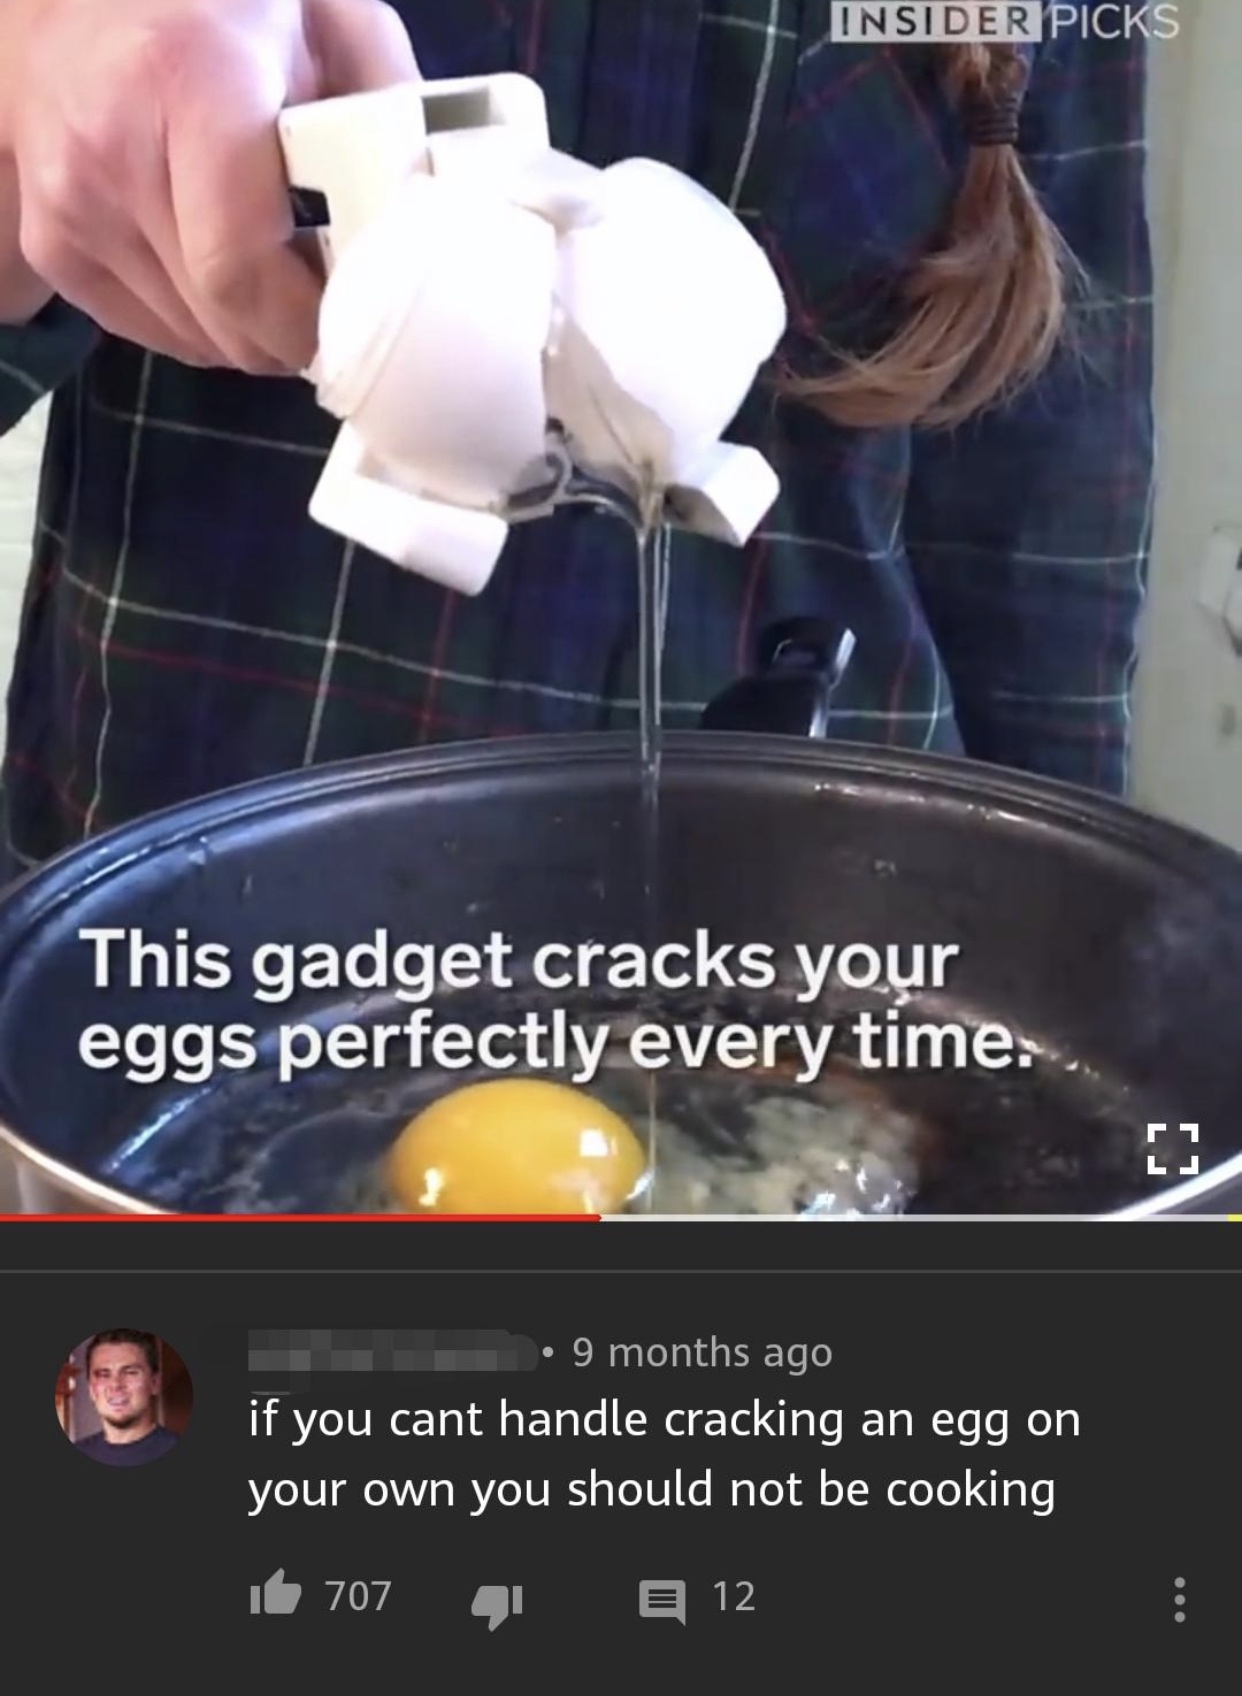 cookware and bakeware - Insider Picks This gadget cracks your eggs perfectly every time. 9 months ago if you cant handle cracking an egg on your own you should not be cooking it 707 41 12